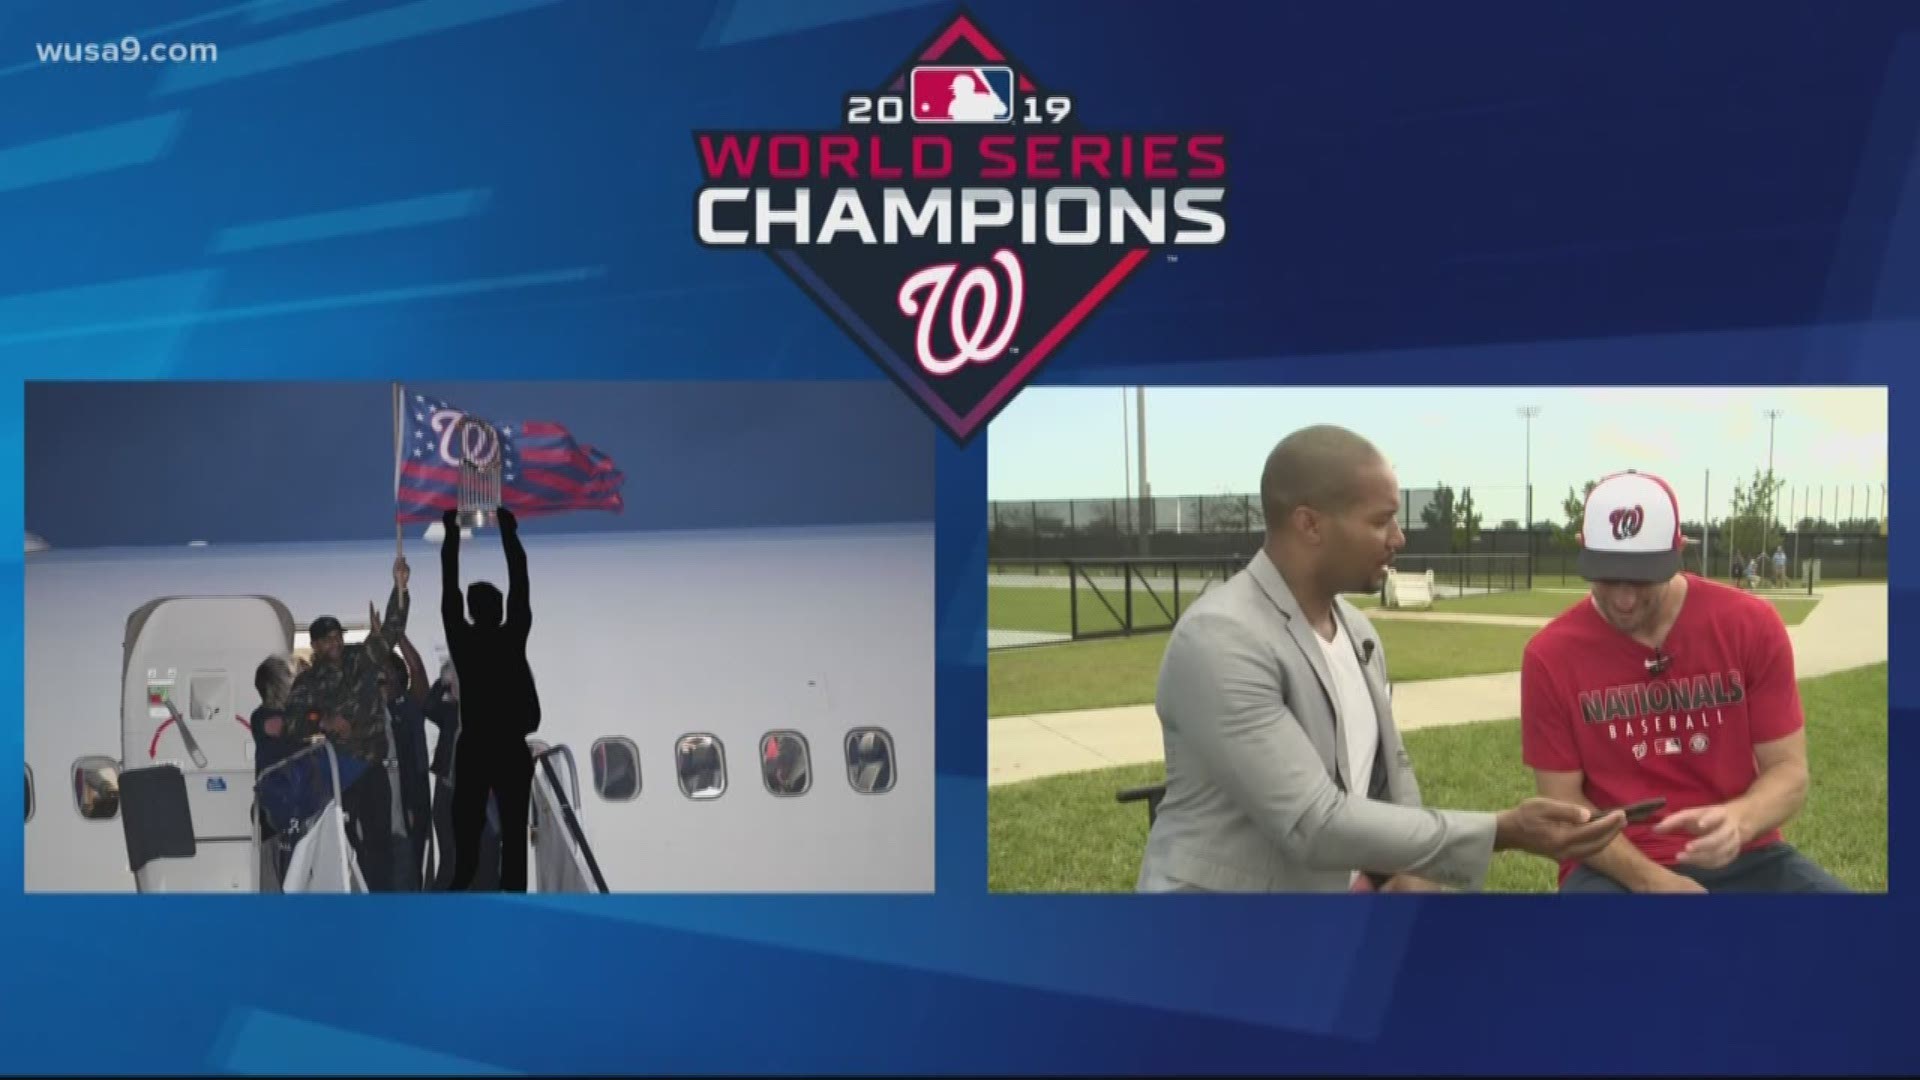 Leave it to WUSA9's Darren Haynes to make the Washington Nationals relieve some hilarious moments from its World Series-winning season and the epic celebration.